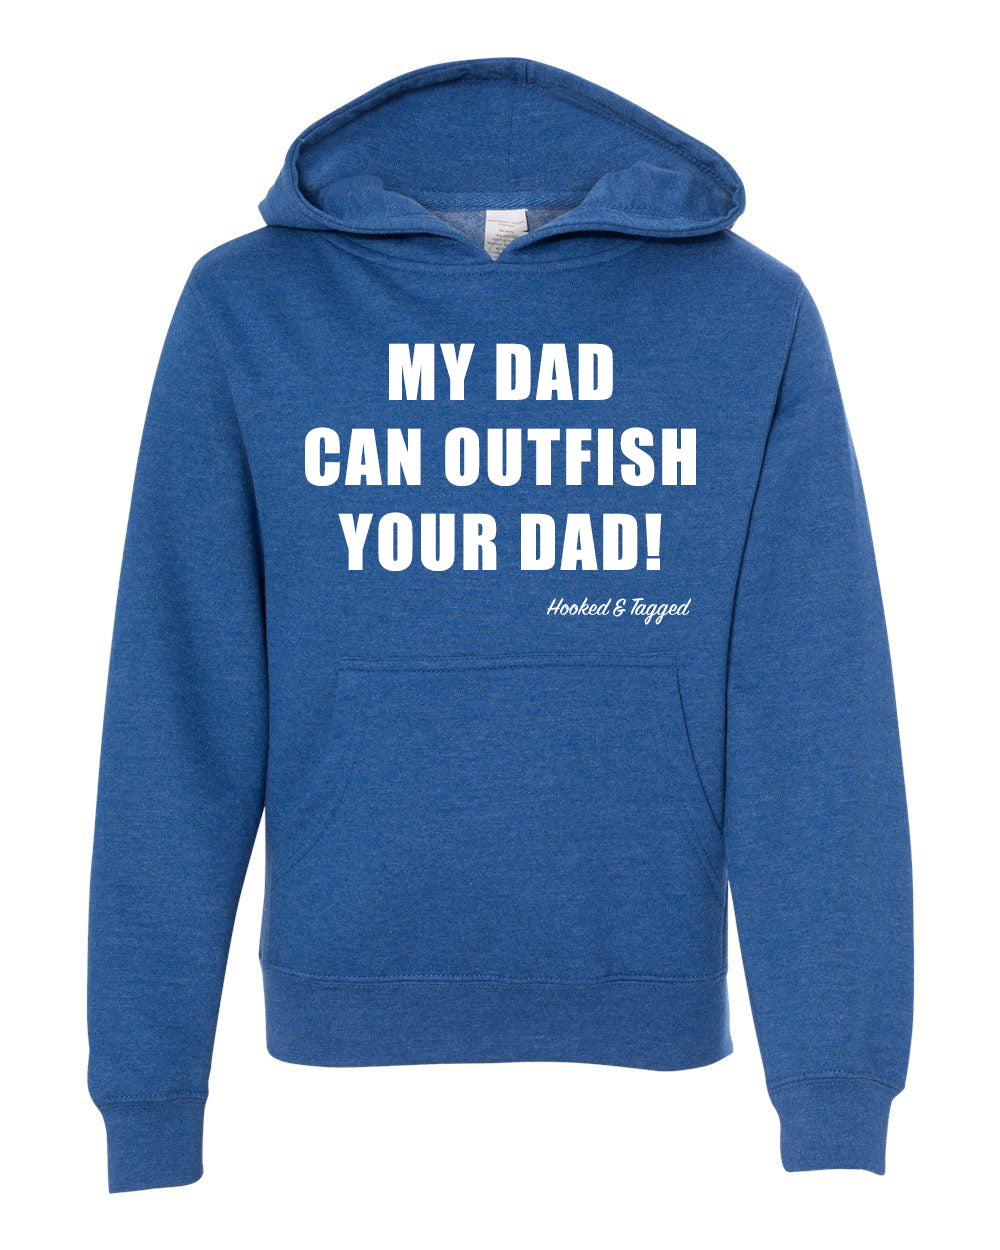 Youth "My Dad Can Outfish Your Dad" Hoodie